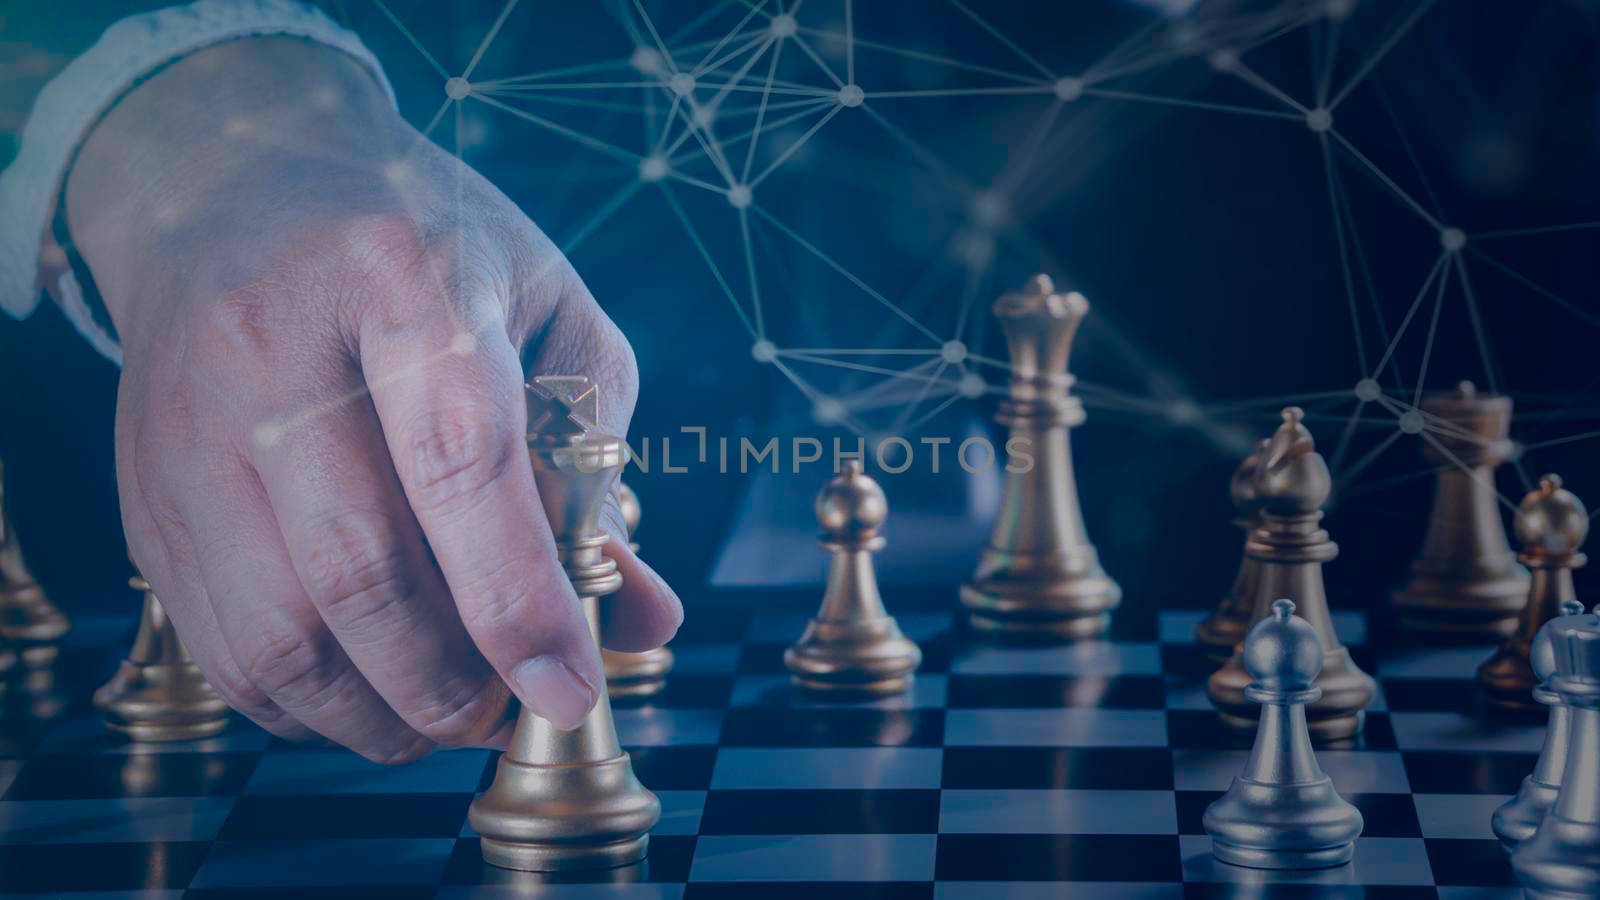 Hand of businessman holding gold king chess on stock market or forex trading graph chart with cityscape image economy trend for digital financial investment.Management or leadership strategy concept. by Chakreeyarut